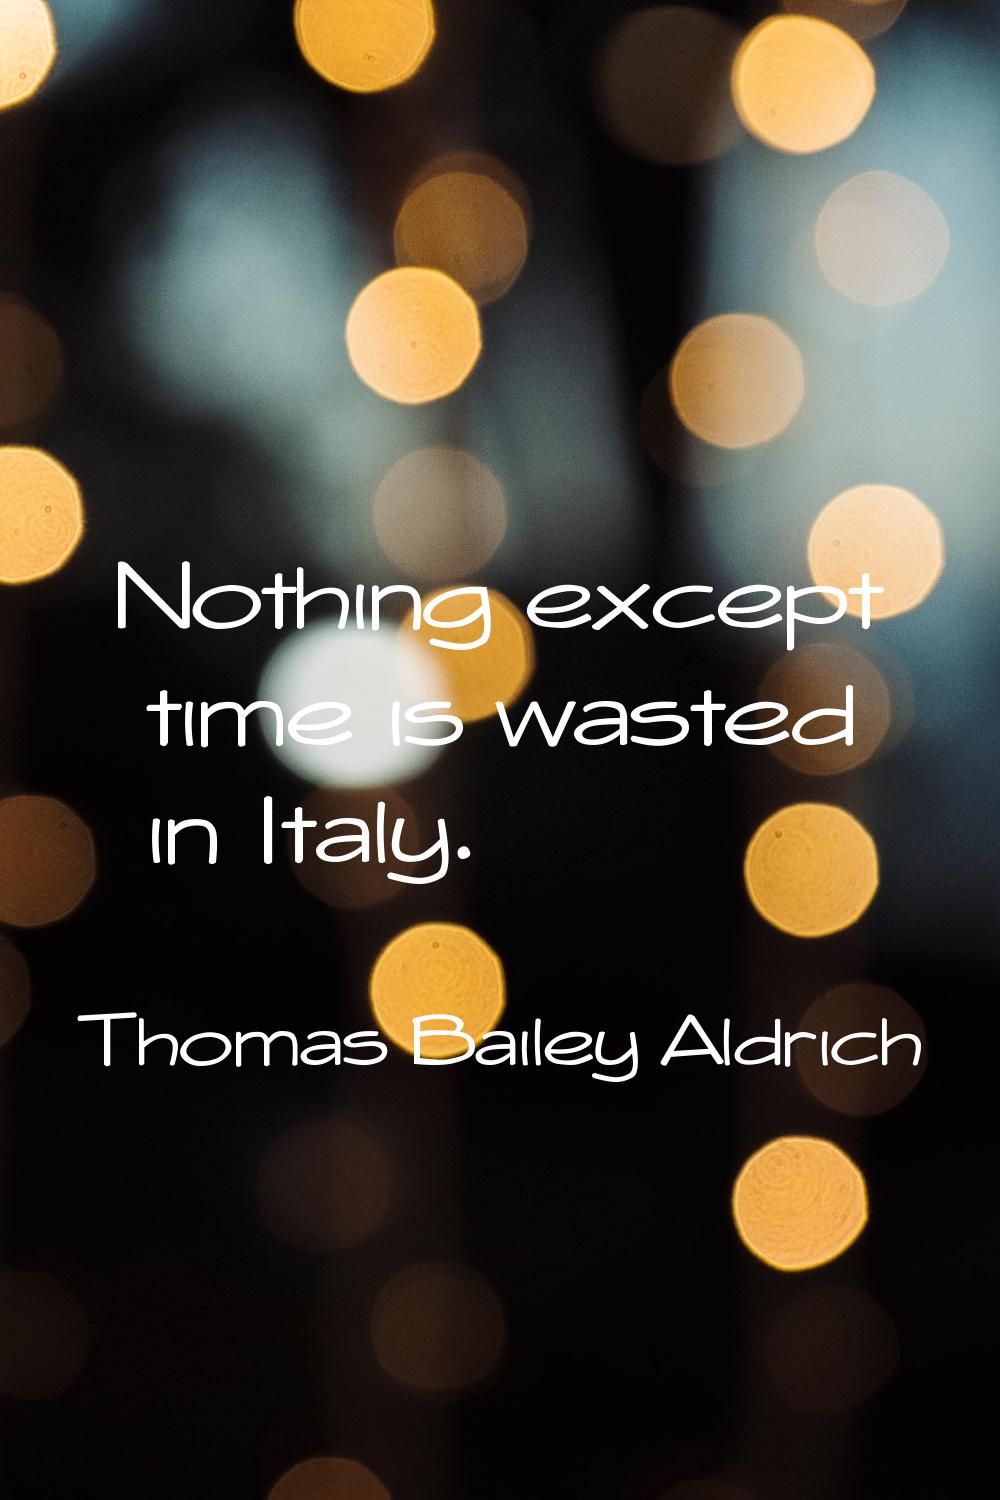 Nothing except time is wasted in Italy.